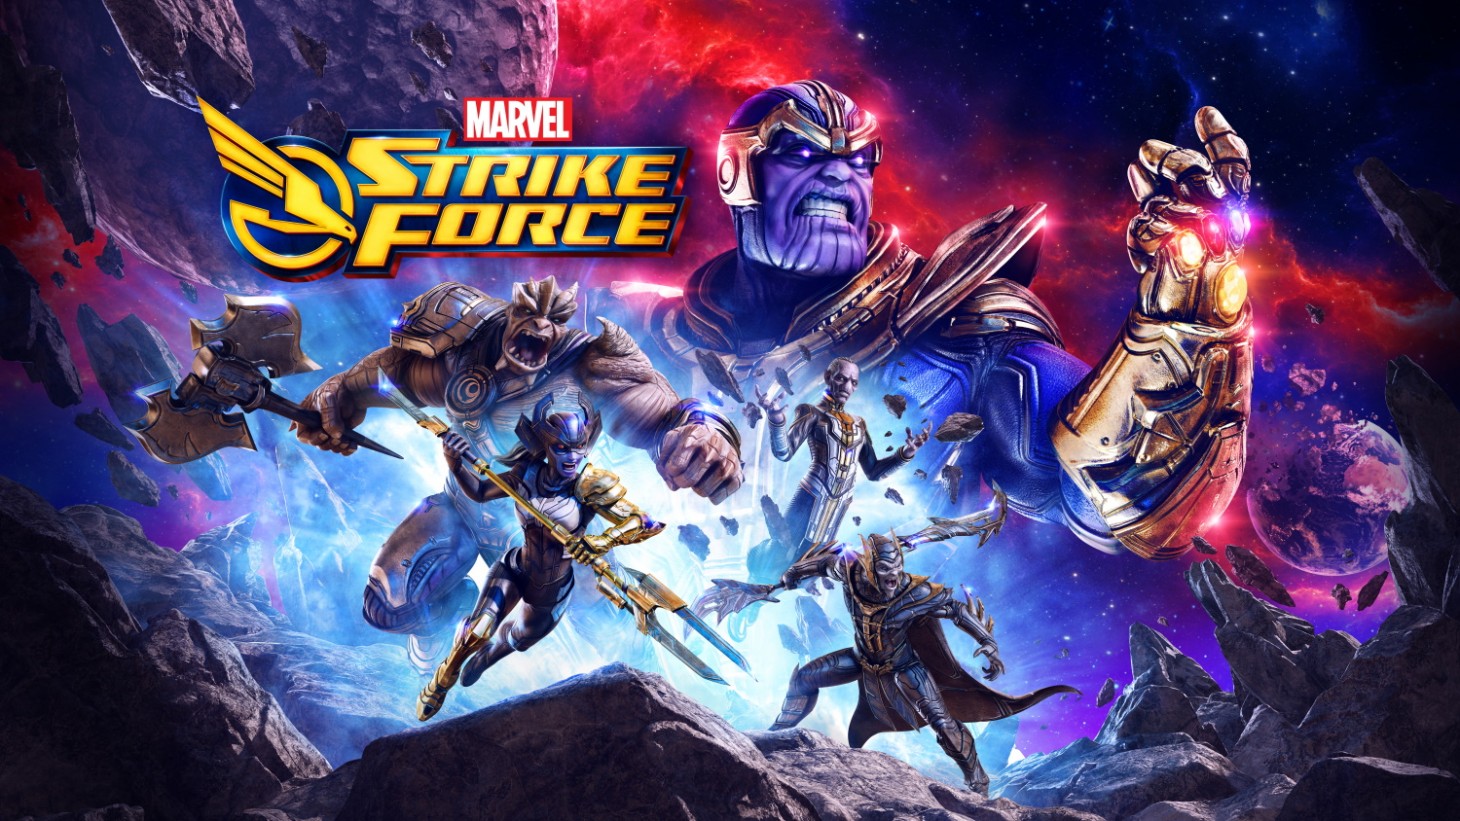 Who Are the Resolute Characters in Marvel Strike Force